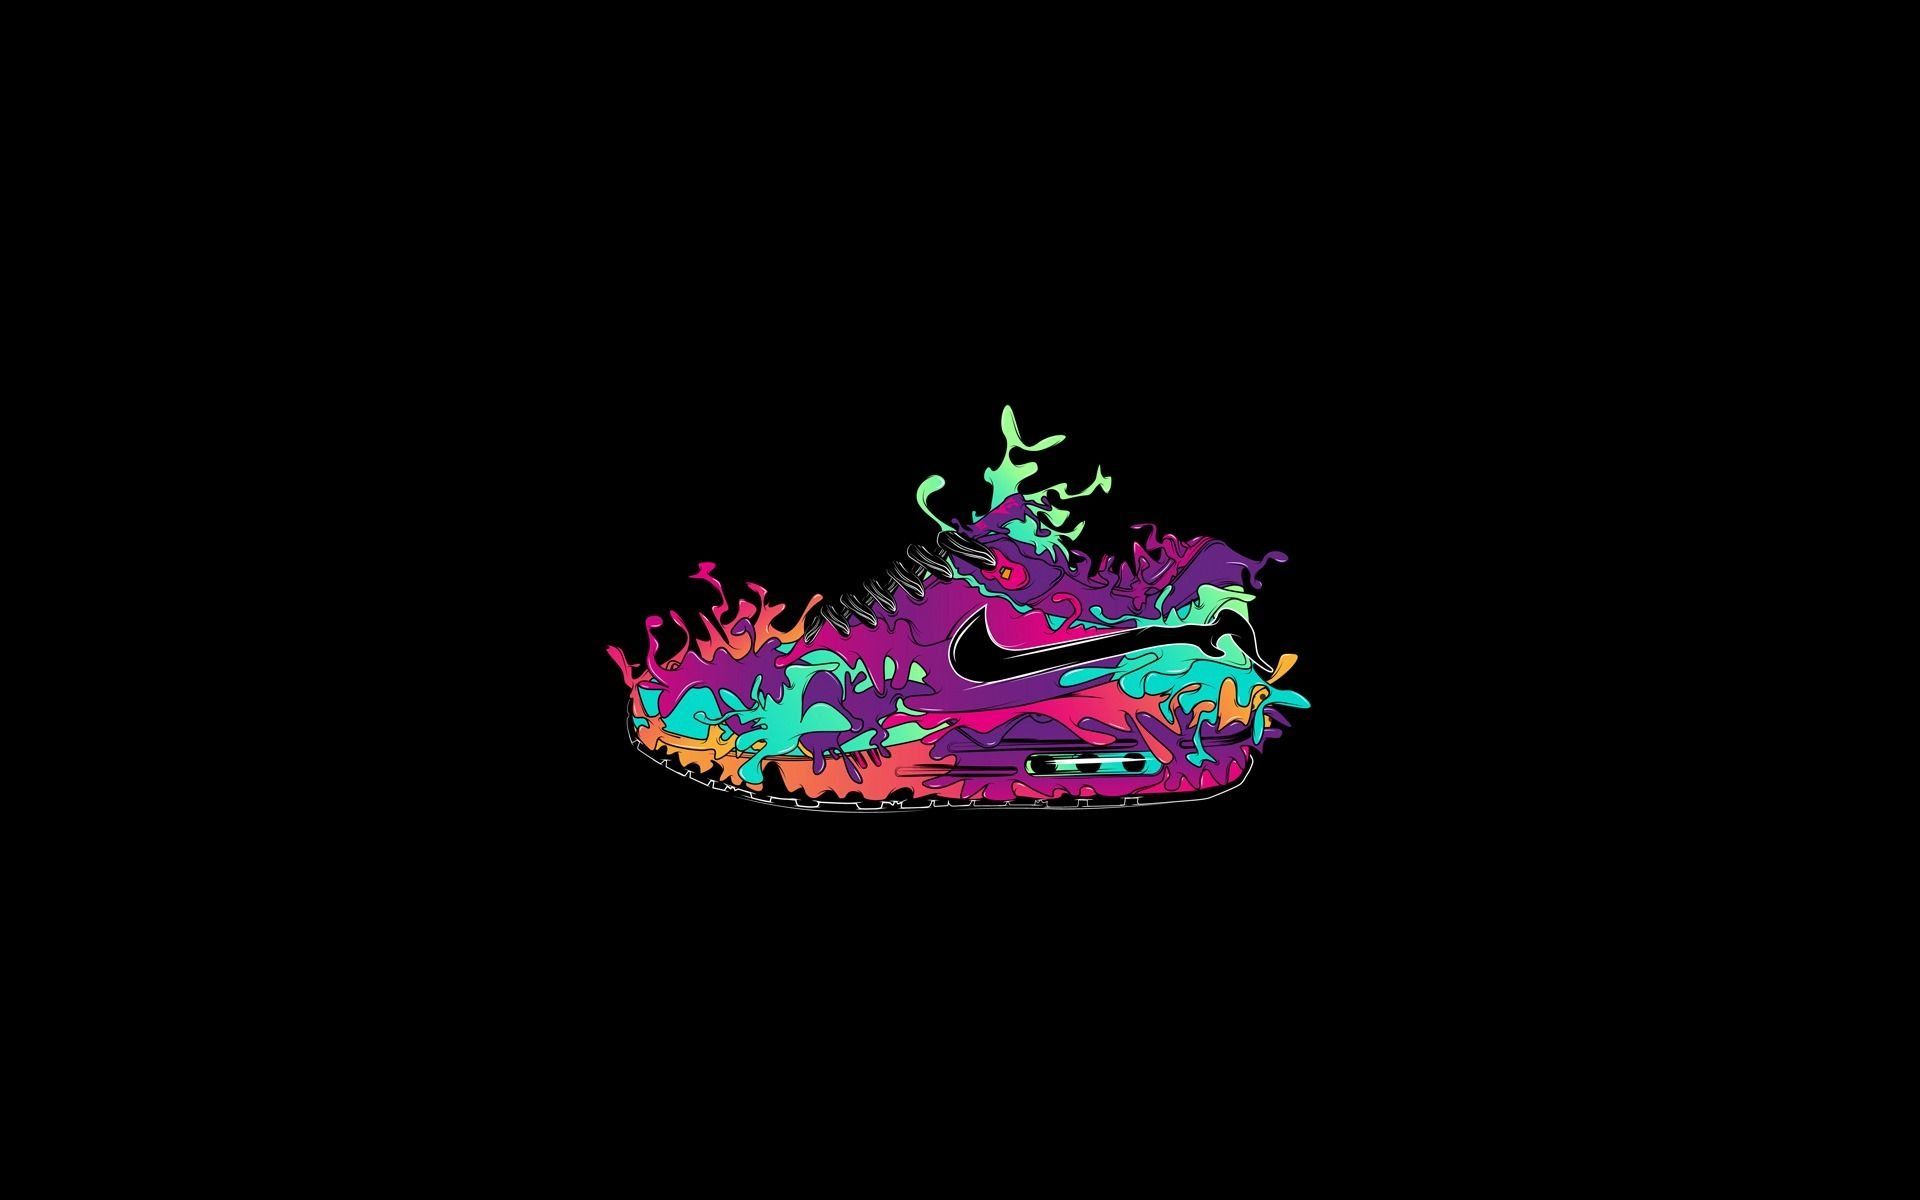 The nike air max 90 is a colorful shoe - Nike